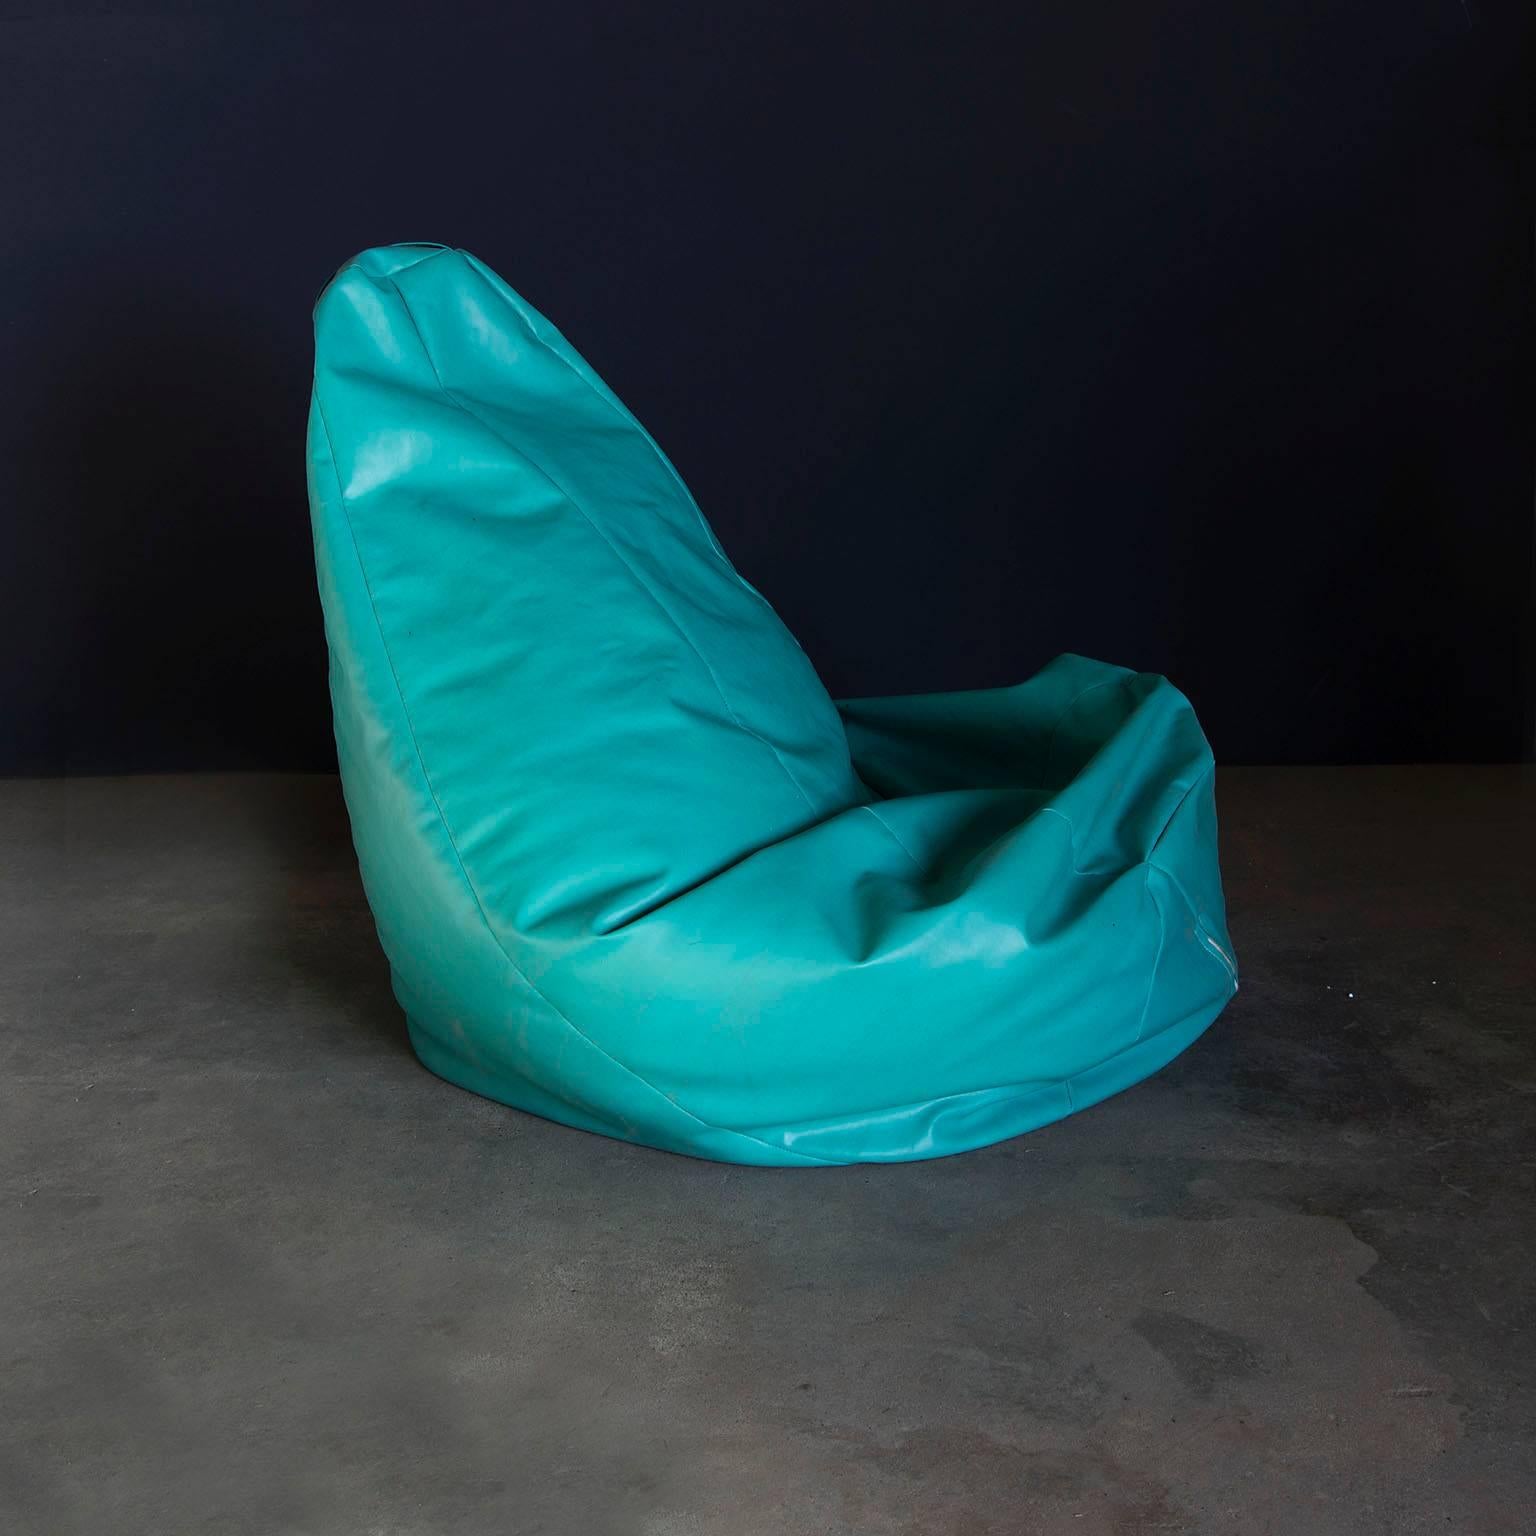 Original vintage beanbag or bean bag, Sacco, in turquoise, designed by Piero Gatti in good condition.